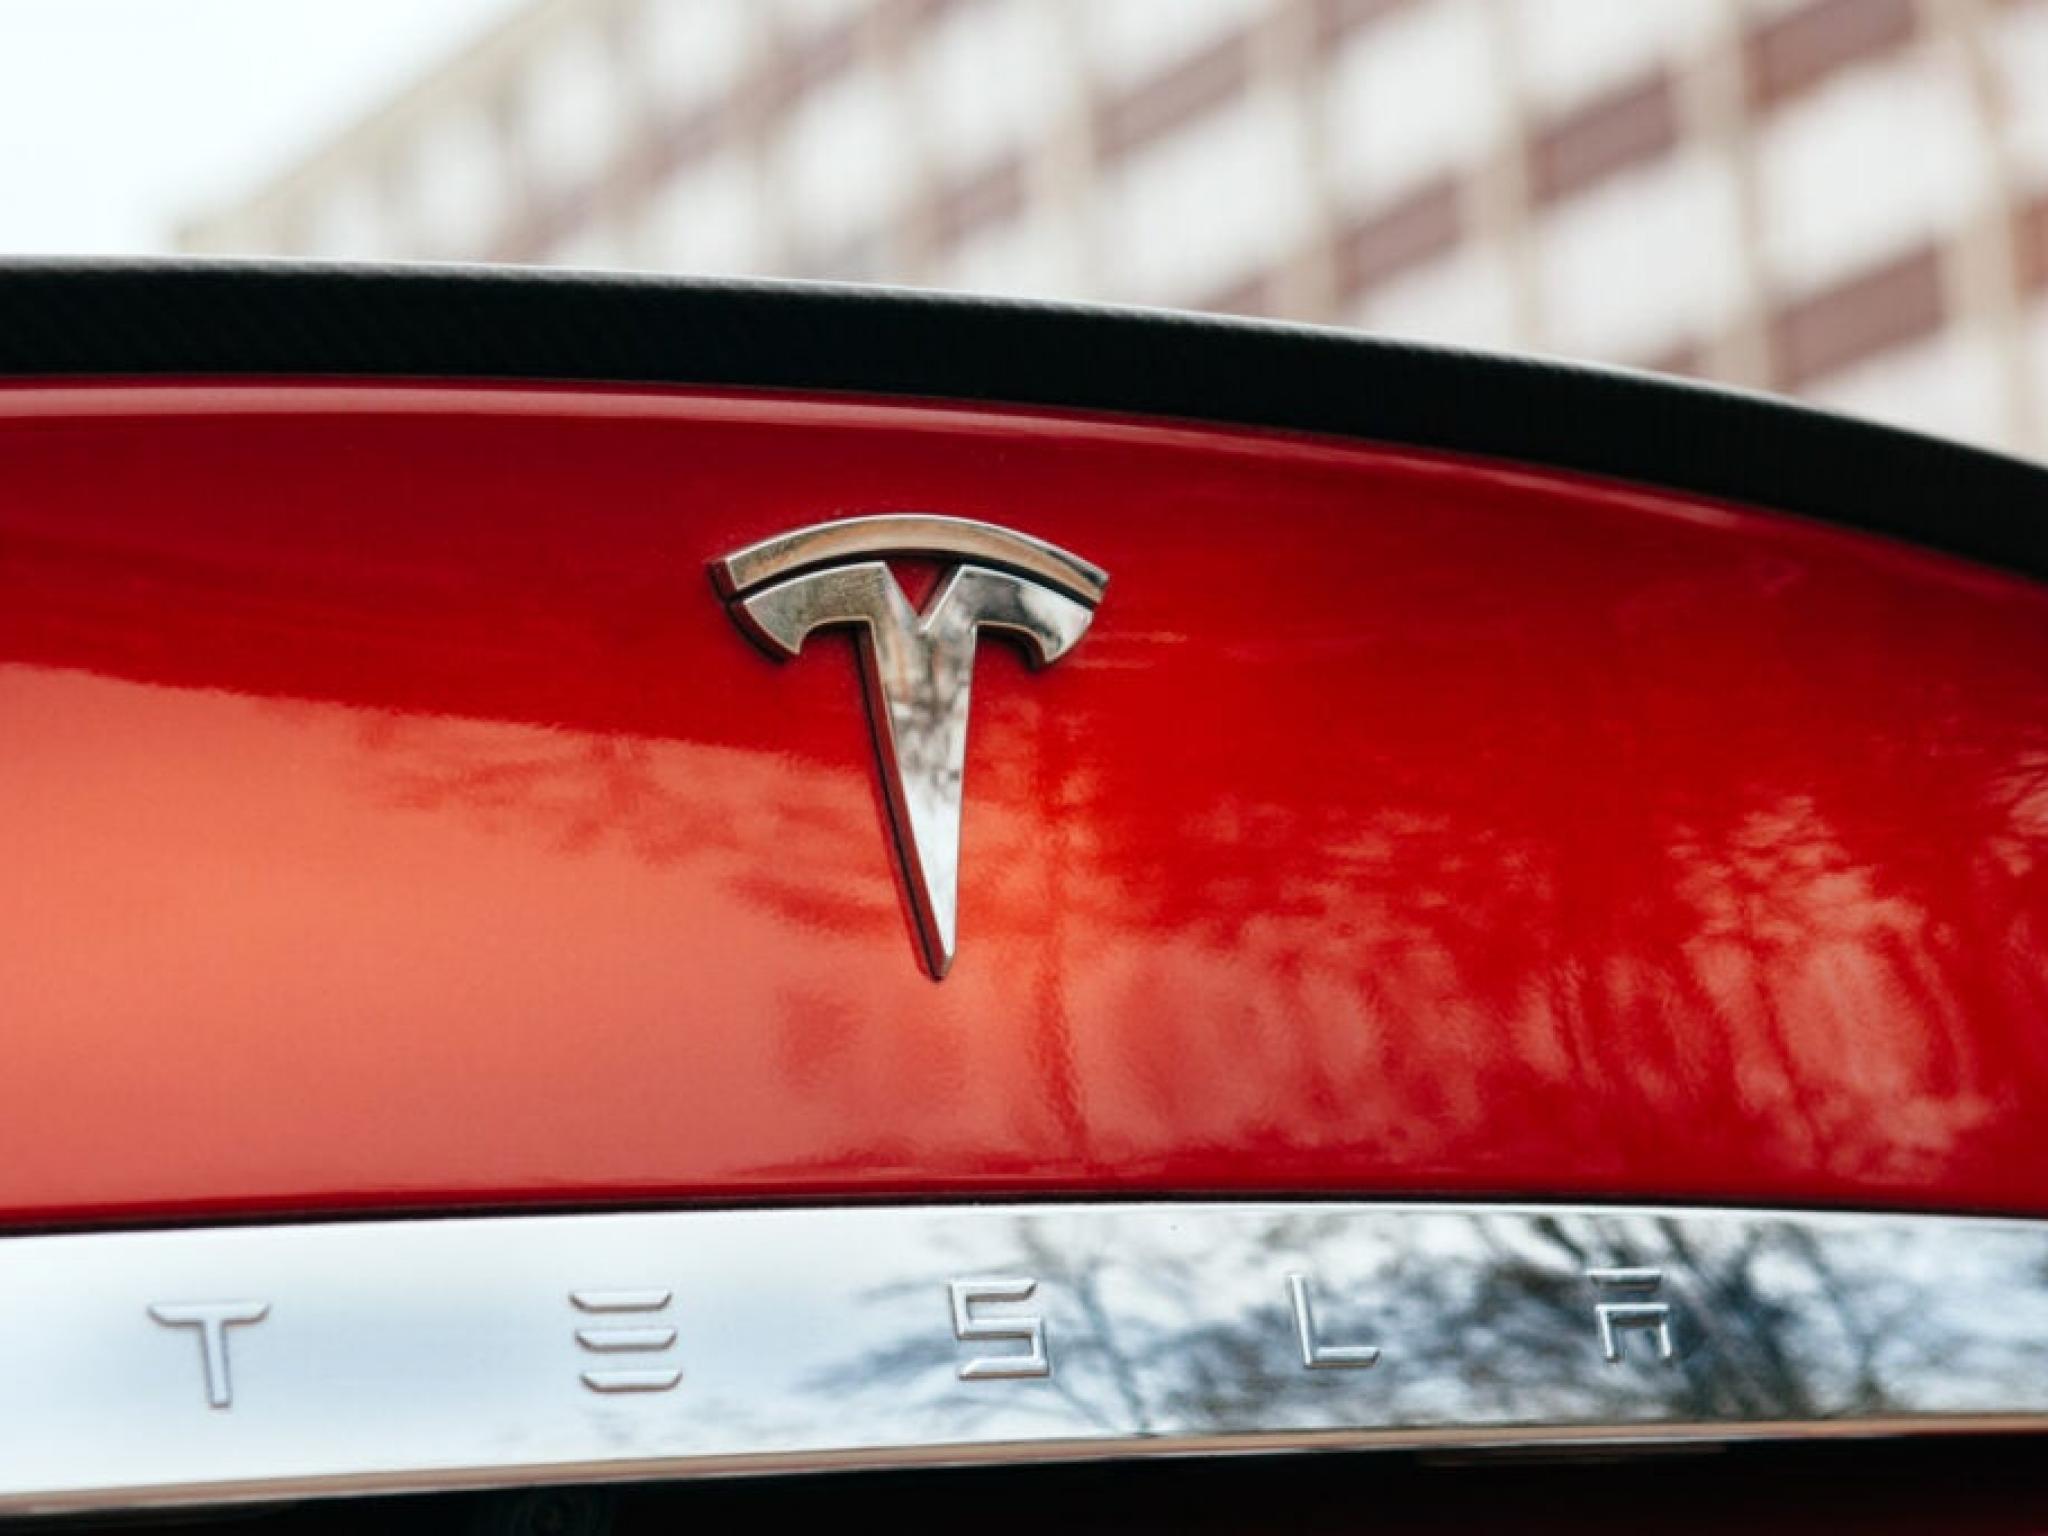  tesla-to-rally-around-30-here-are-10-top-analyst-forecasts-for-wednesday 